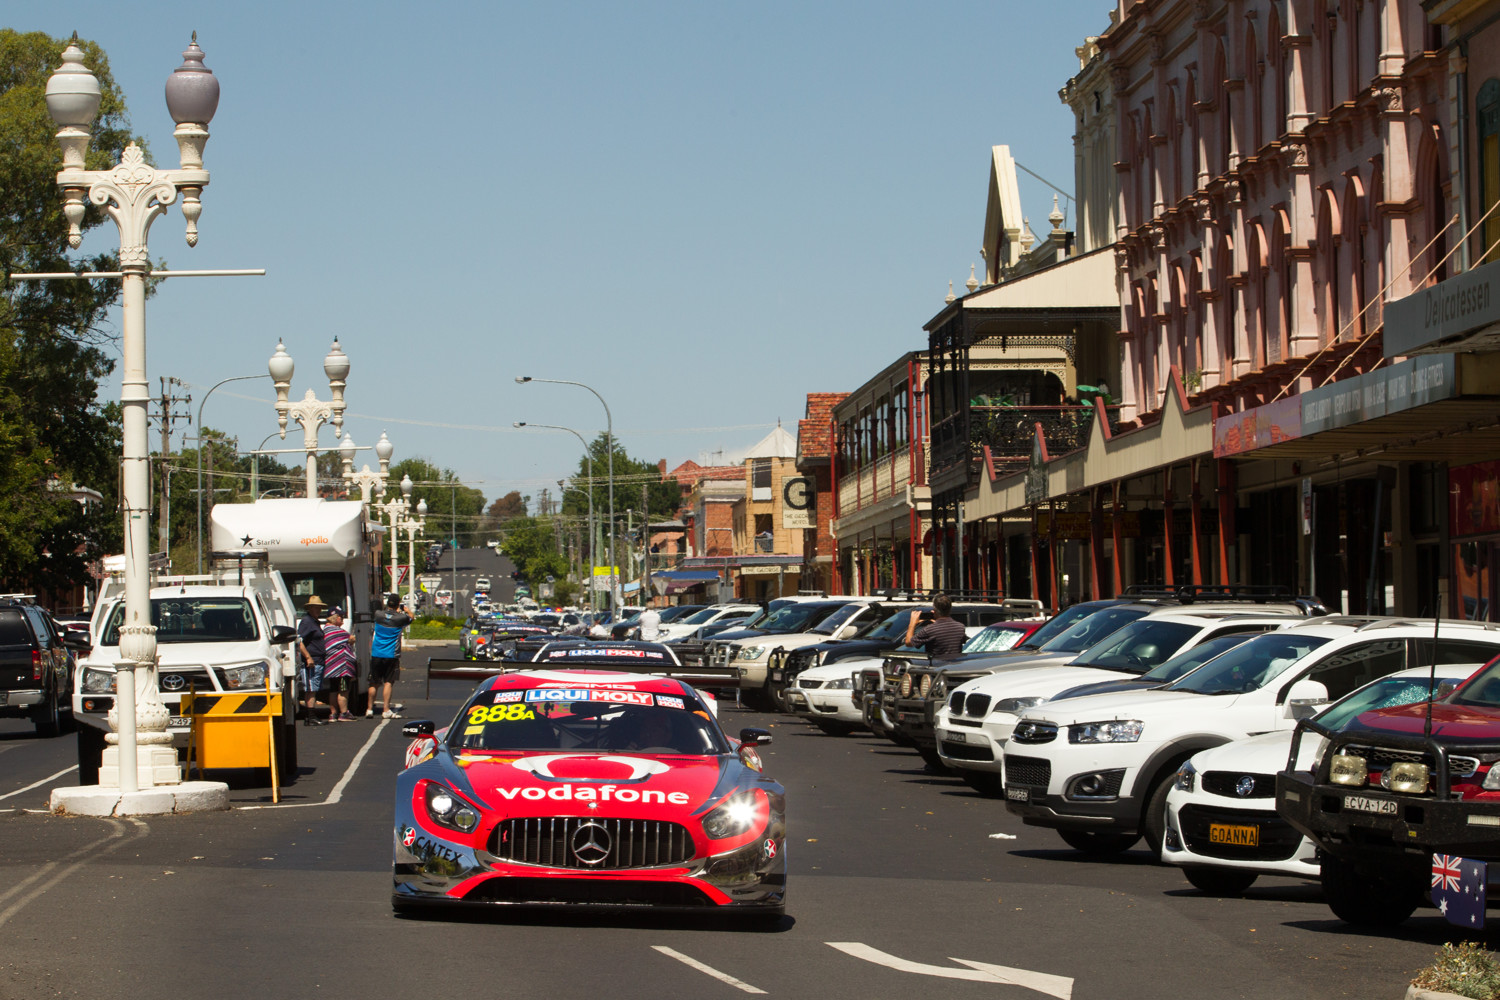 The 888 Mercedes-AMG Team Vodafone Mercedes-AMG GT3 during the Town to Track parade